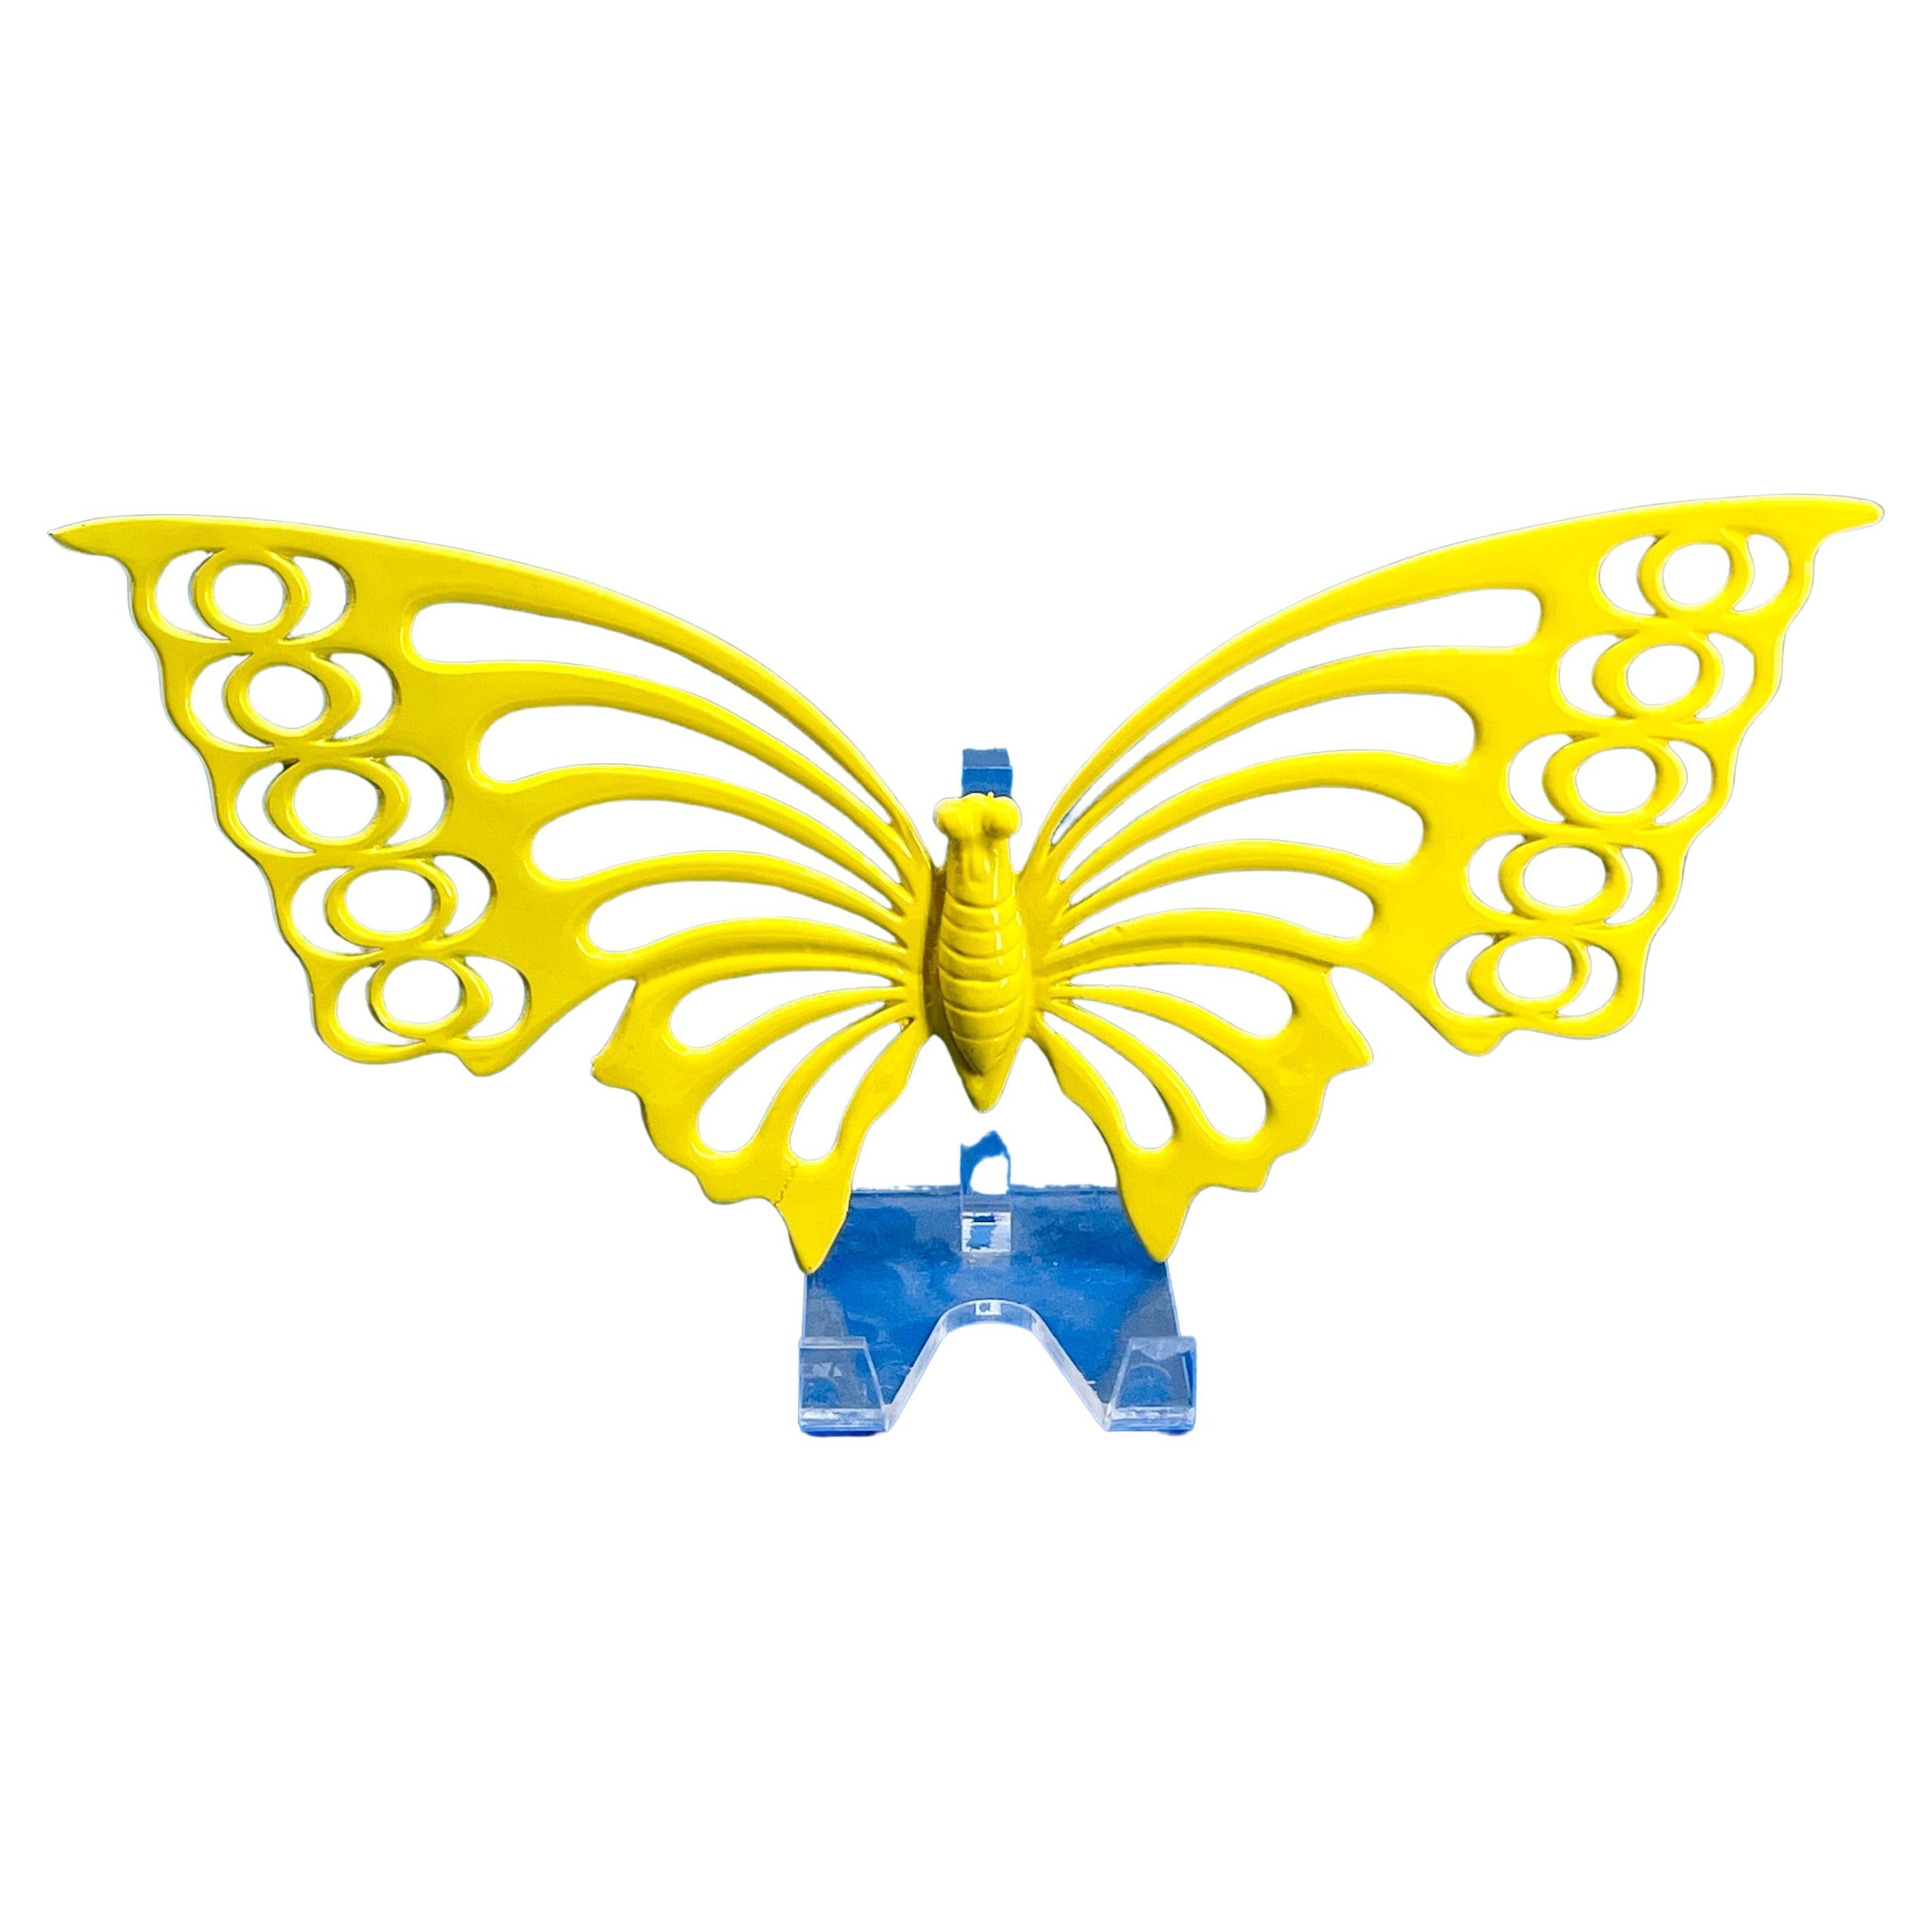 Powder-Coated Large Brass Midcentury Butterfly Sculpture in Bright Yellow Powder-Coat For Sale